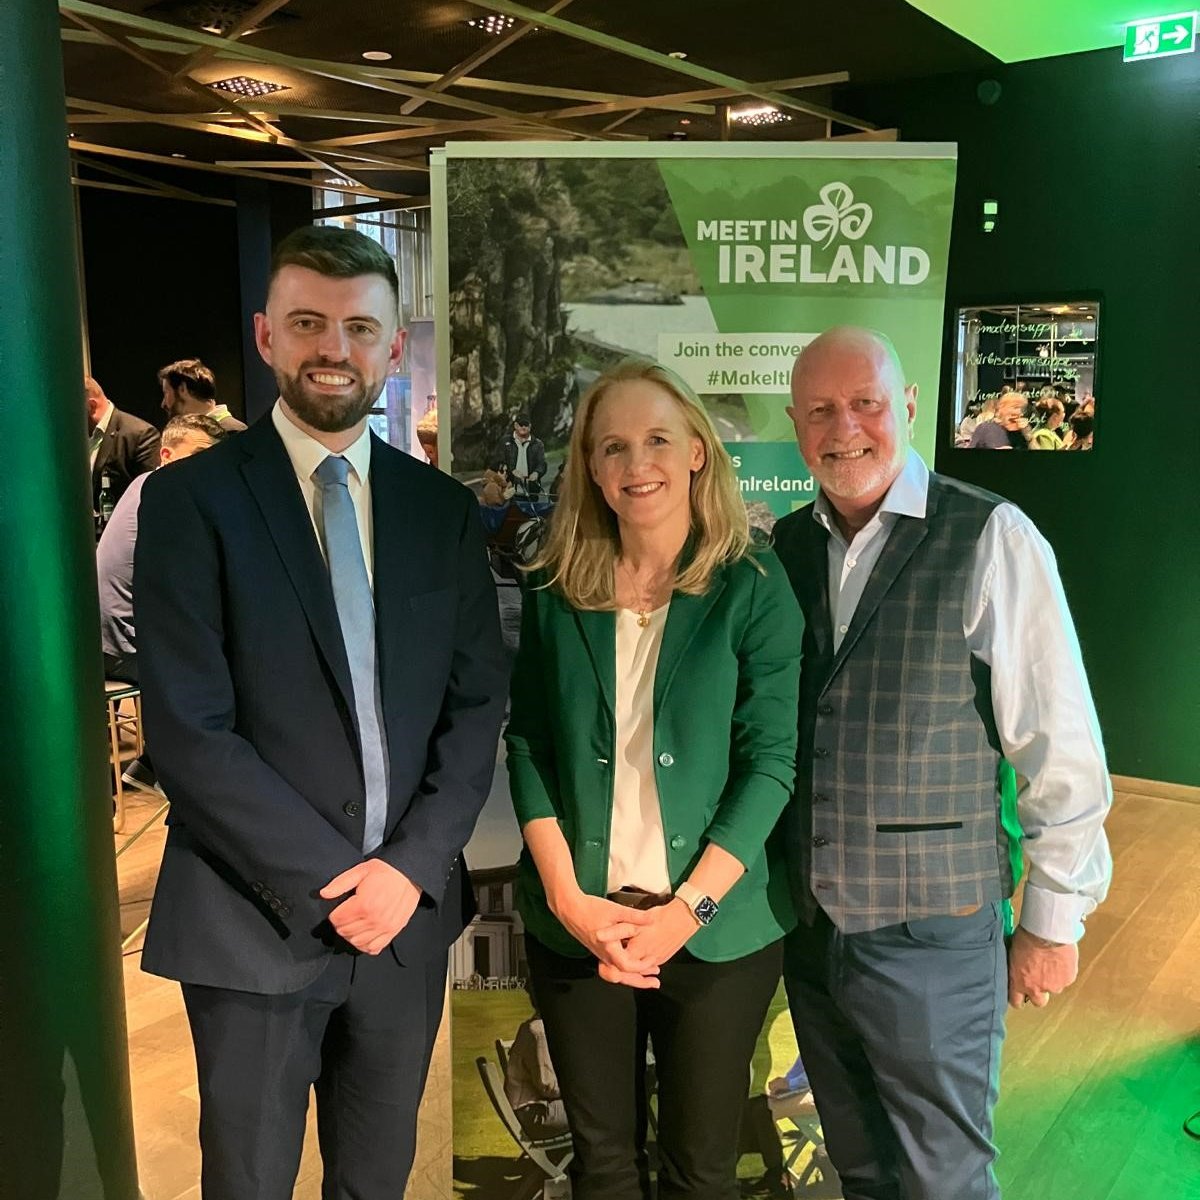 Congratulations to @Nadine76Lehmann and her team at @EntdeckeIrland for organising a great reception en marge of IMEX Frankfurt. Great to speak to Head of Middle East, Asia and Emerging Markets, @DavidBoyce55, as well as tourism businesses from the island of Ireland. #TeamIreland